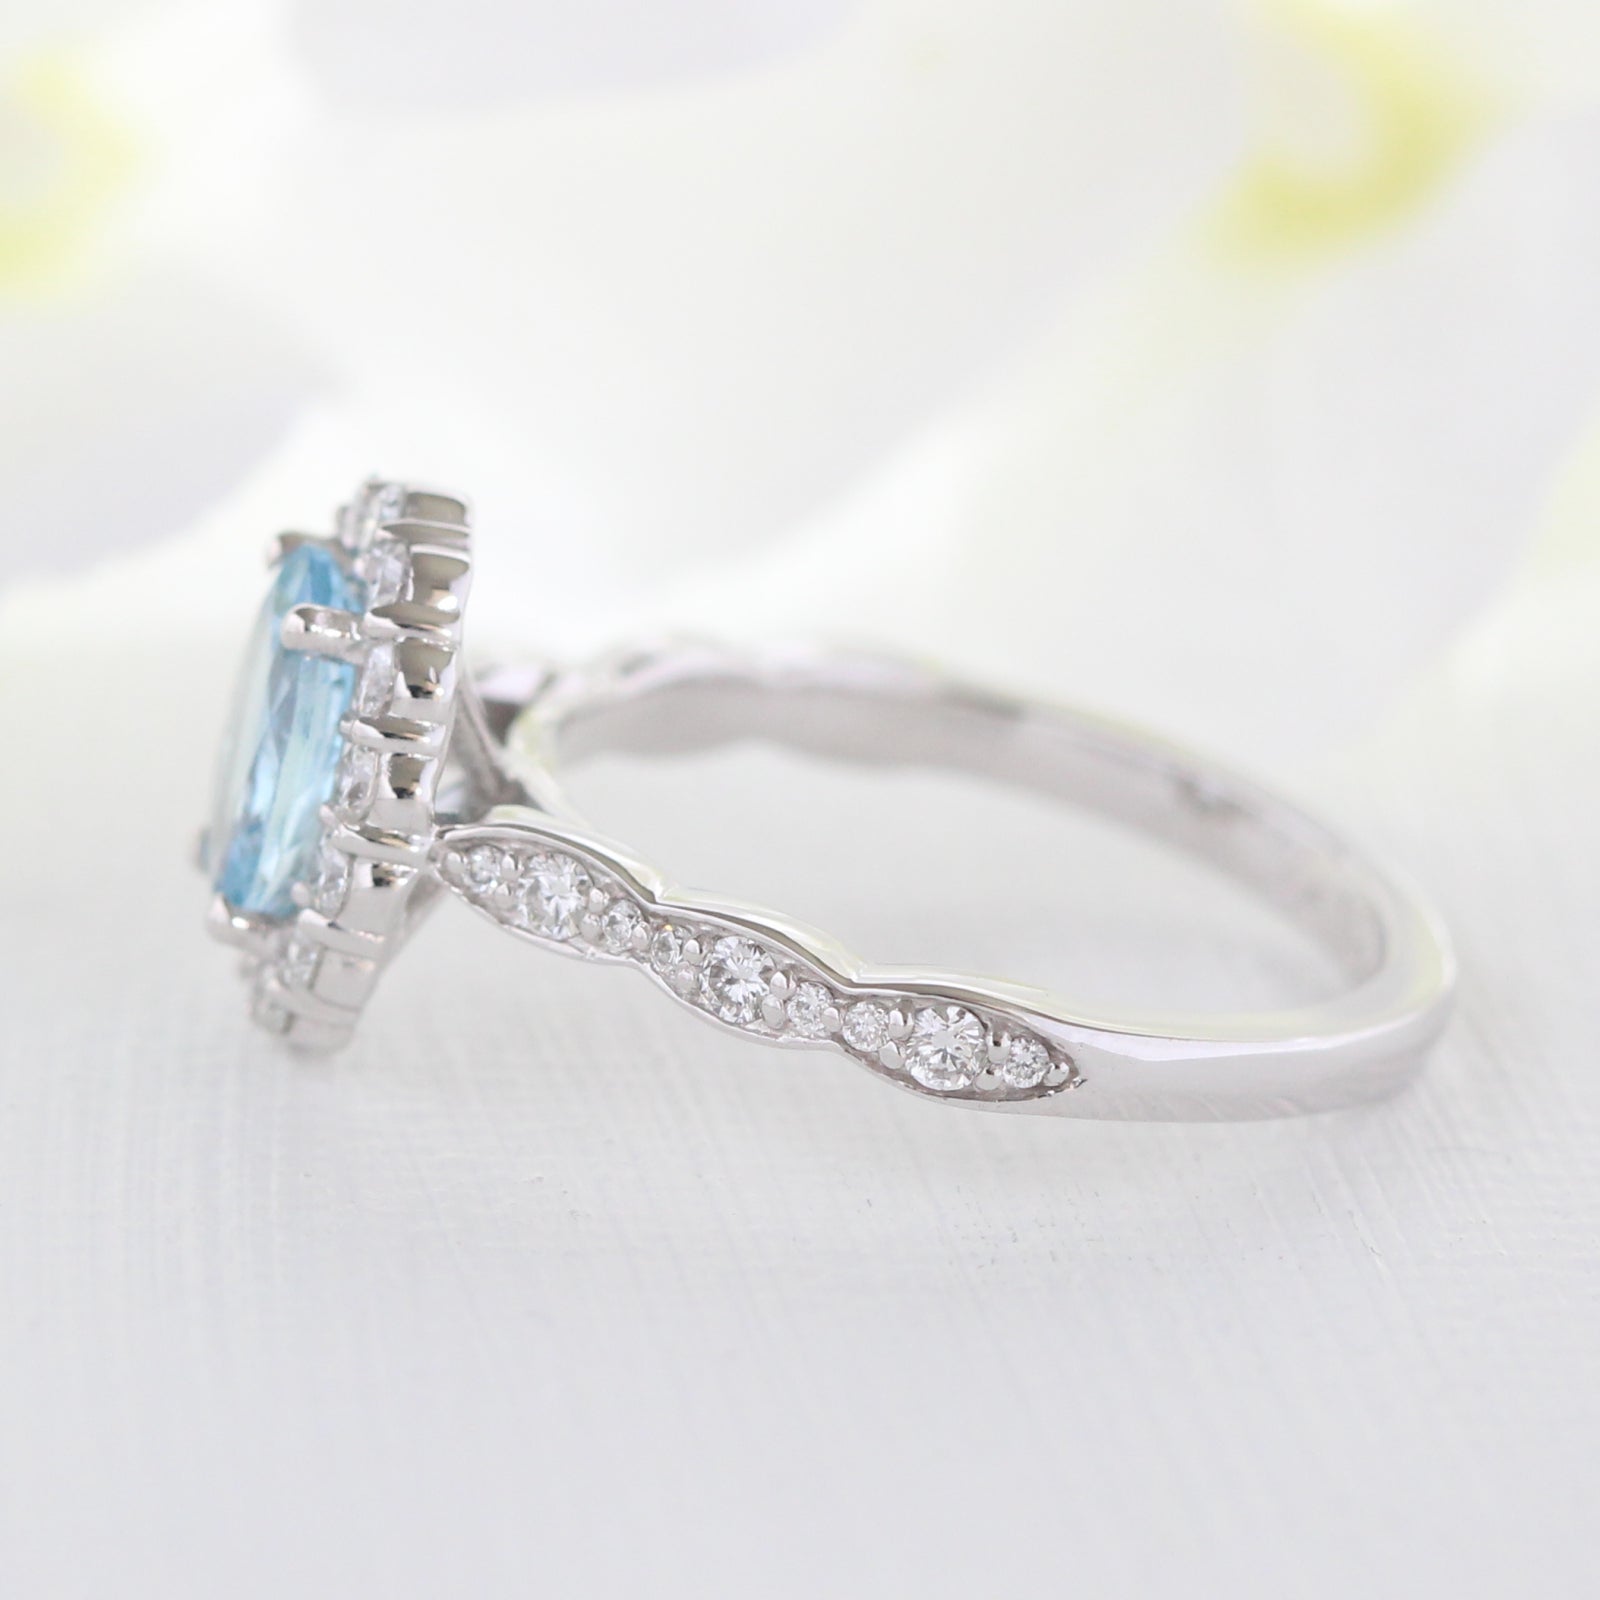 aquamarine-engagement-ring-scalloped-halo-diamond-ring-white-gold-oval-cut-ring-by-la-more-design